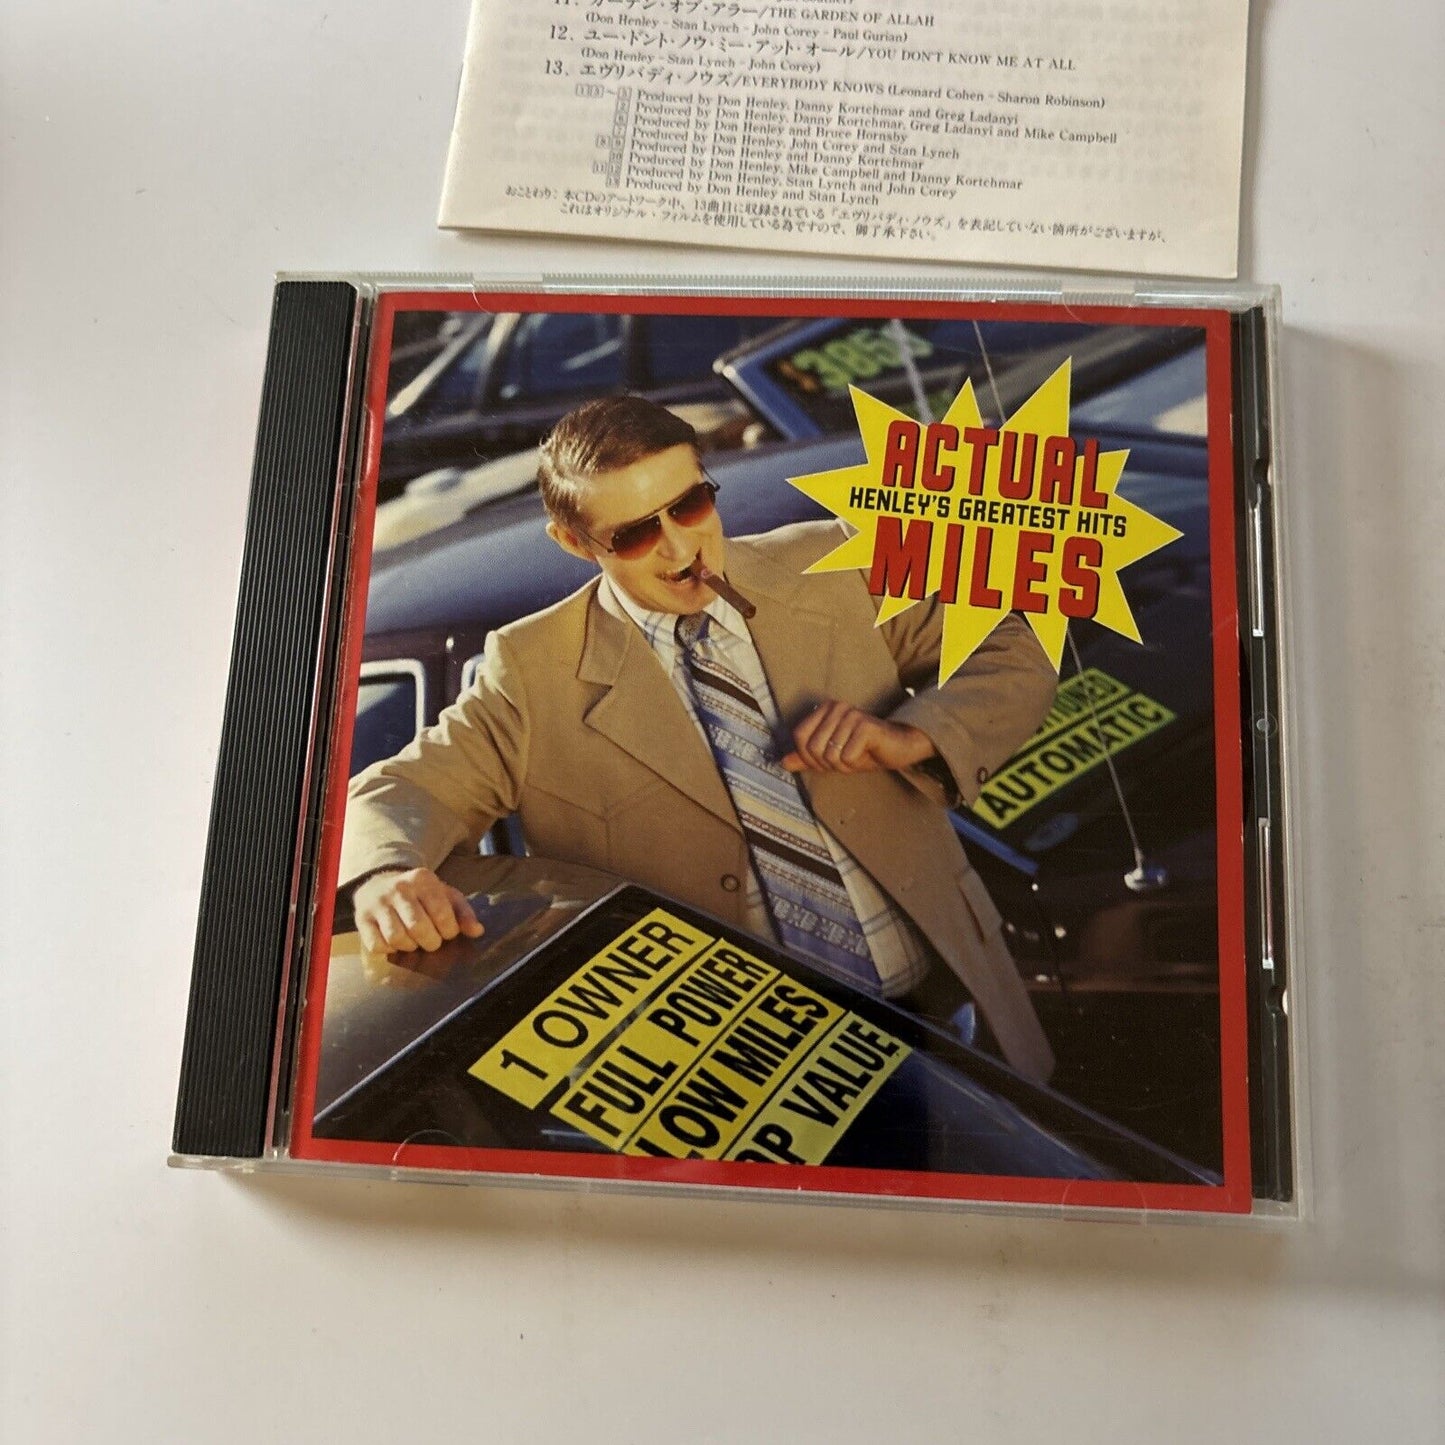 Don Henley - Actual Miles Henley's Greatest Hits (CD, 1995) Japan Mvcg-188